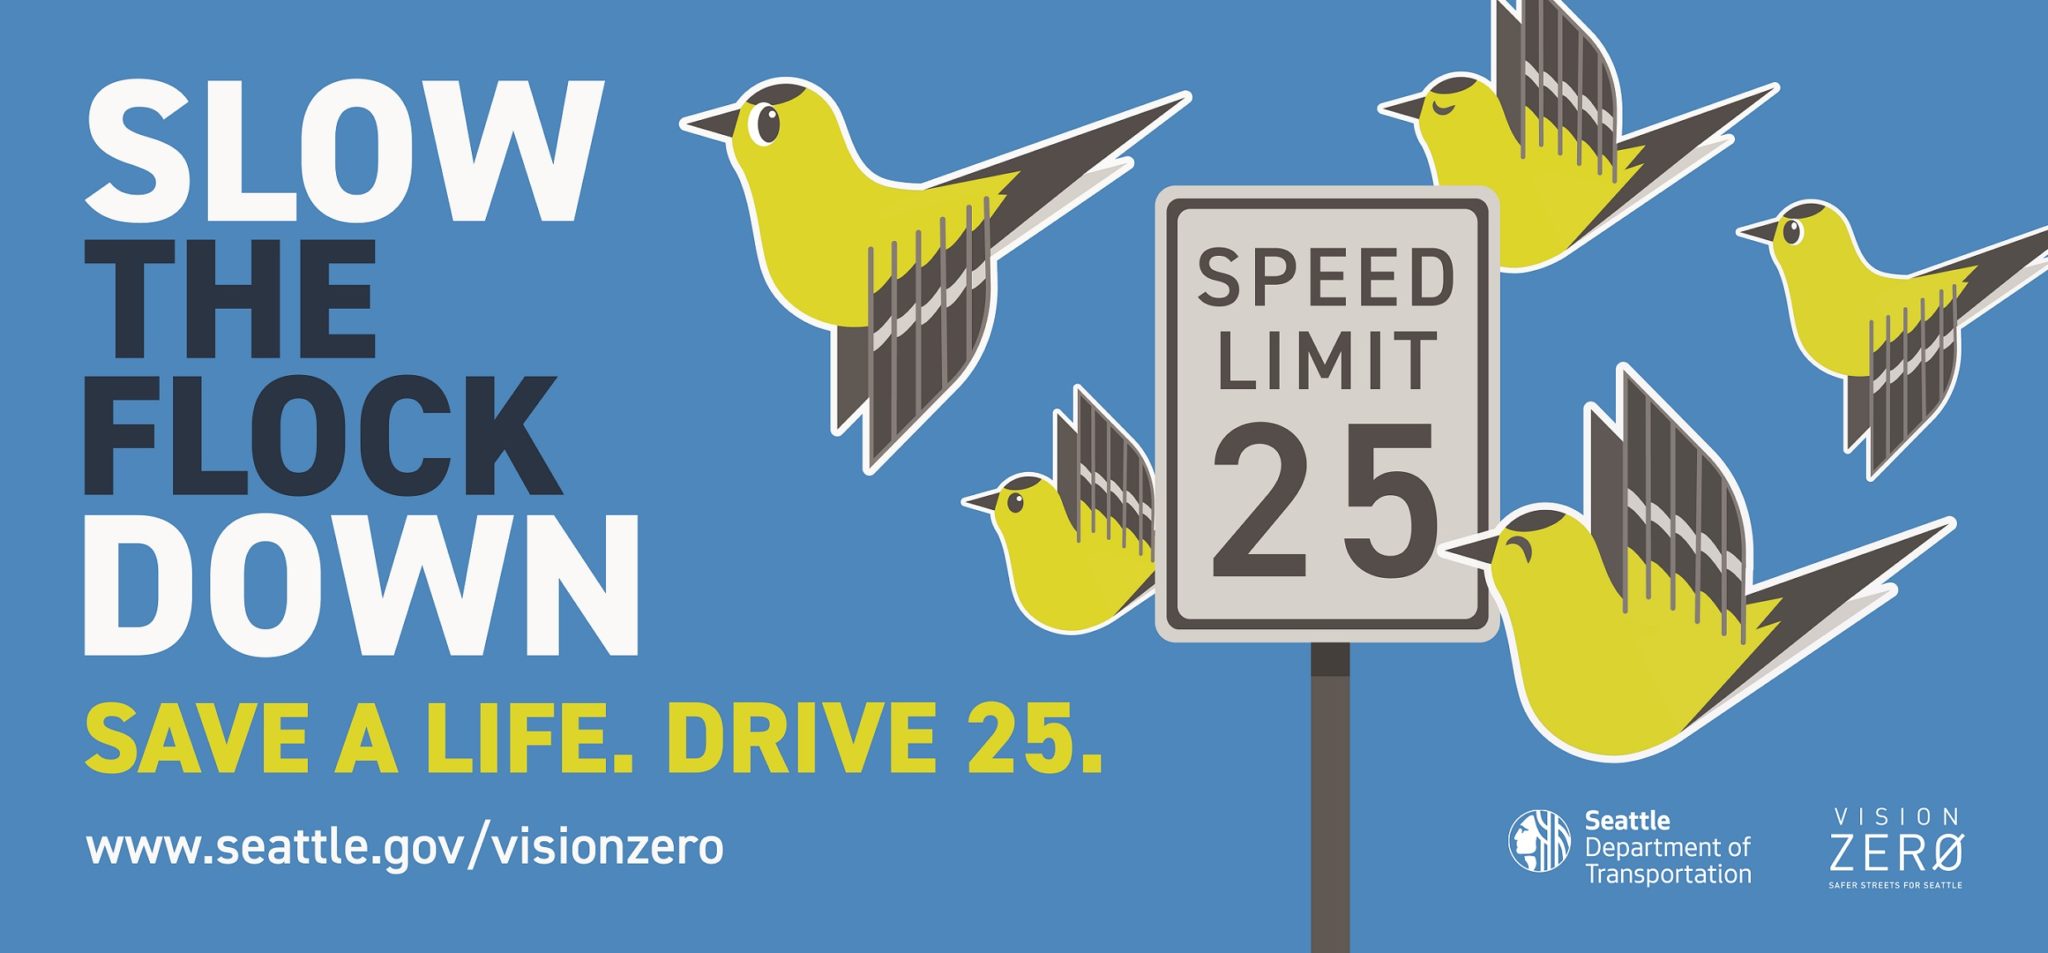 Graphic highlighting a public education campaign encouraging drivers to slow down. The graphic shows several birds with a 25 MPH speed limit sign, with text saying 